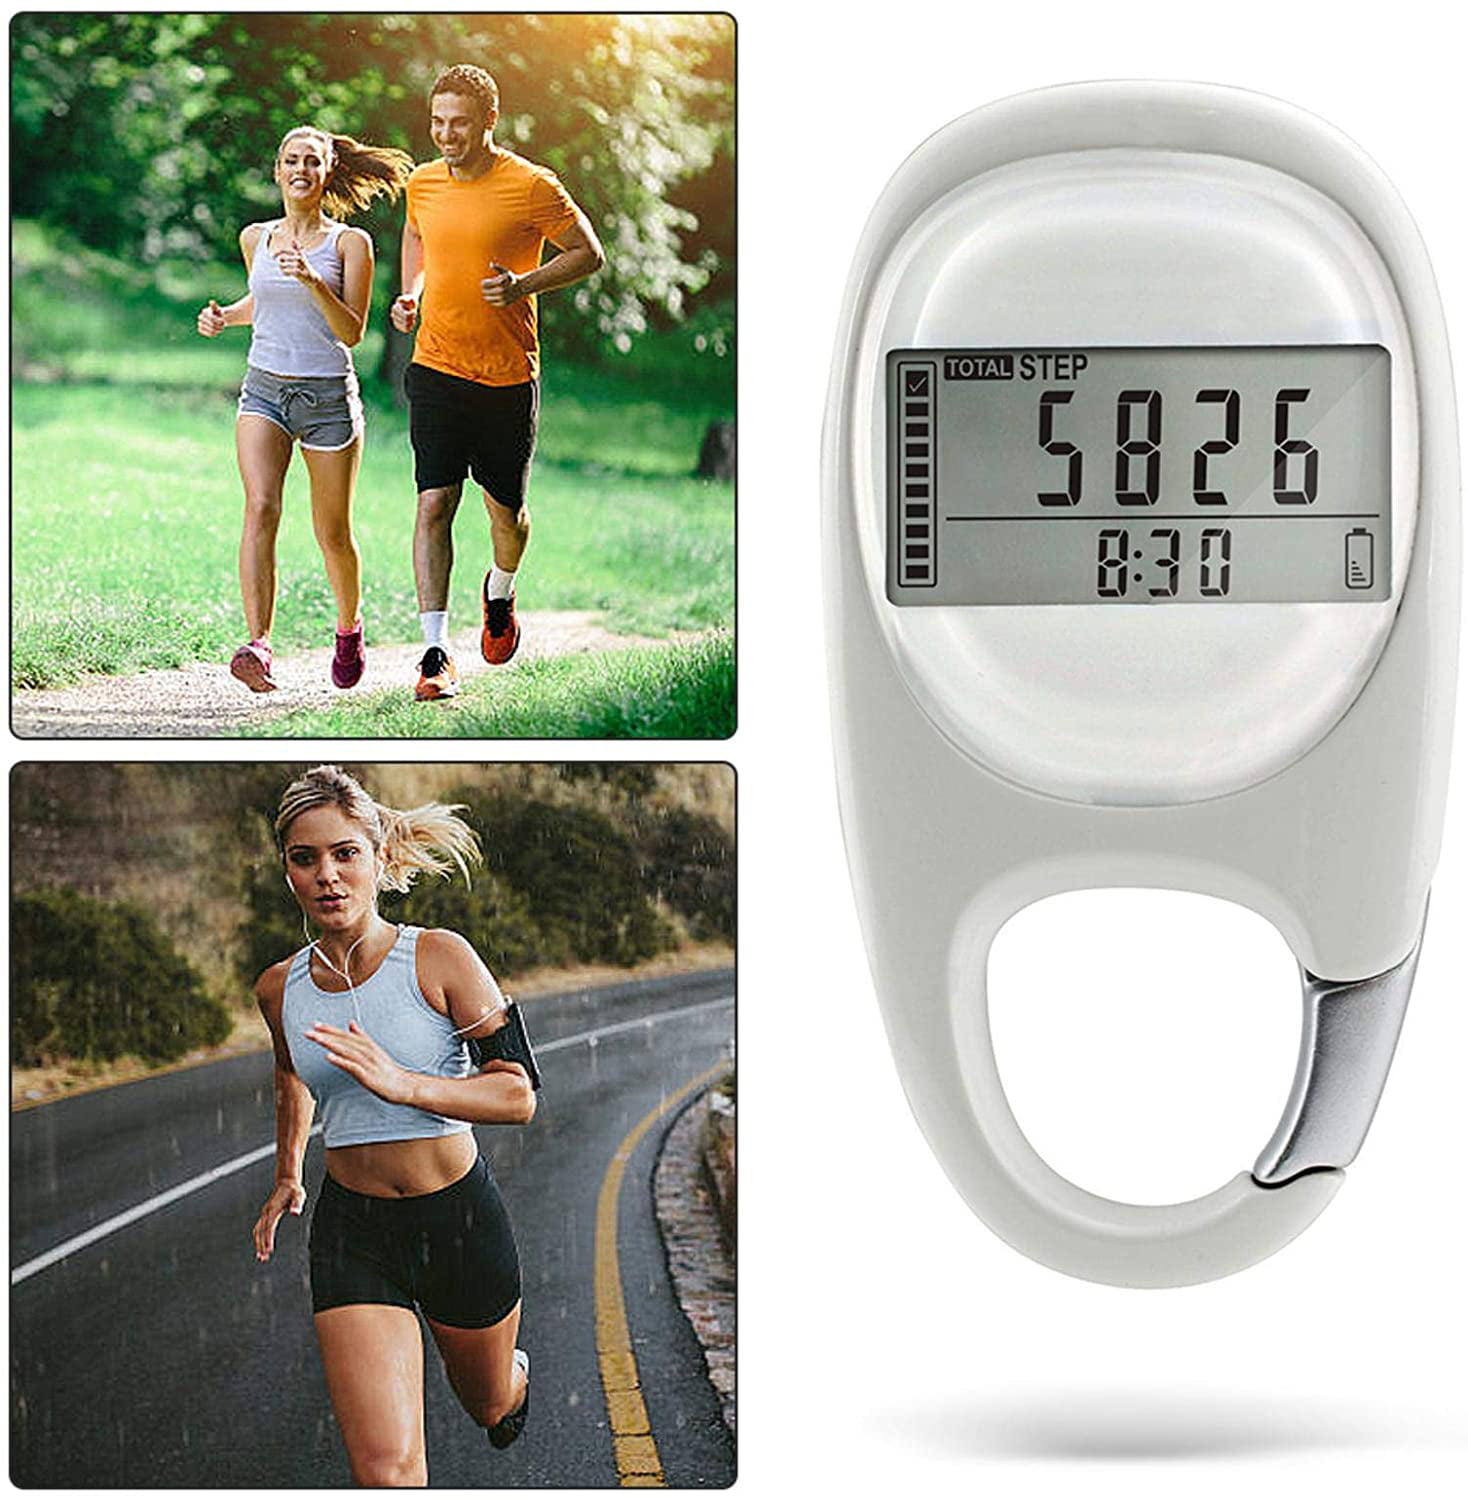 Walking Distance Miles/km Exercise Fitness Activity Calorie Counter for Men and Women 3D Walking Distance Pedometer Portable Pedometer with Clip 